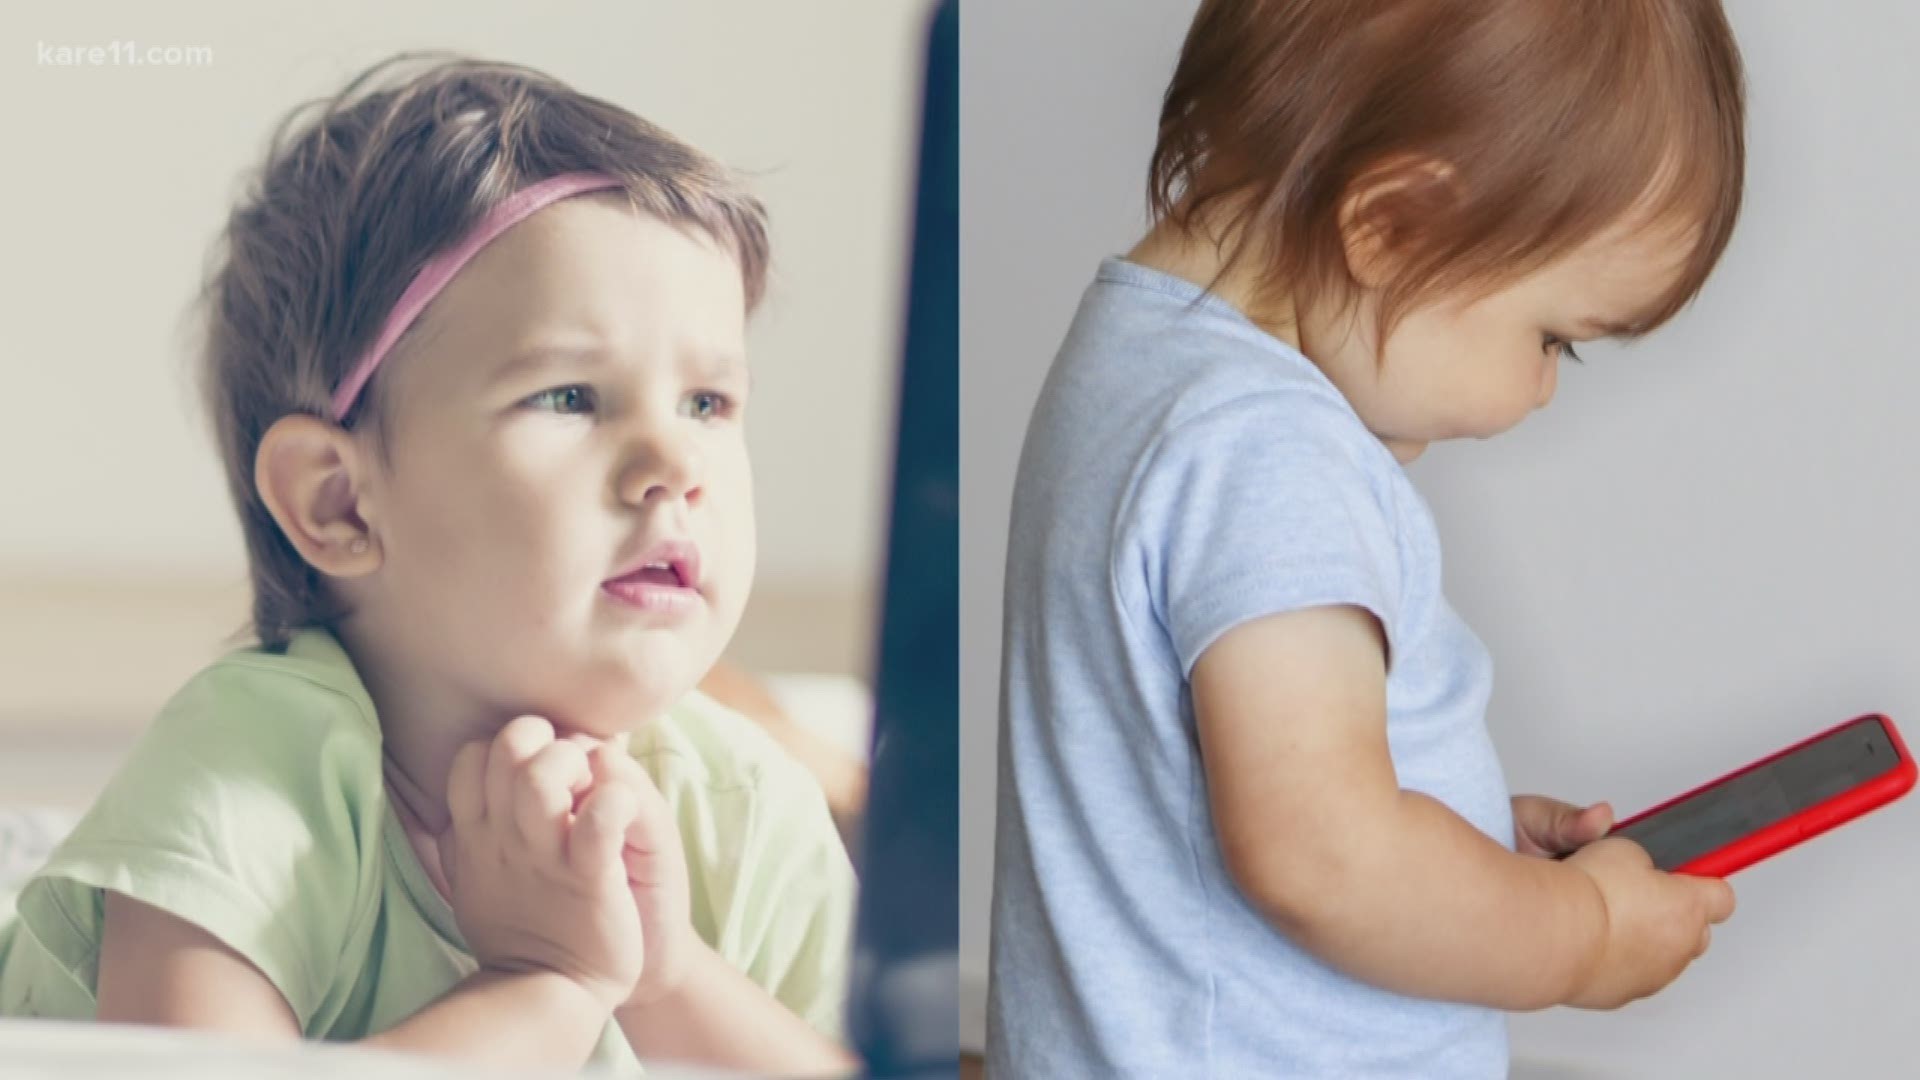 Even small amounts of screen time can be detrimental to young children's health.